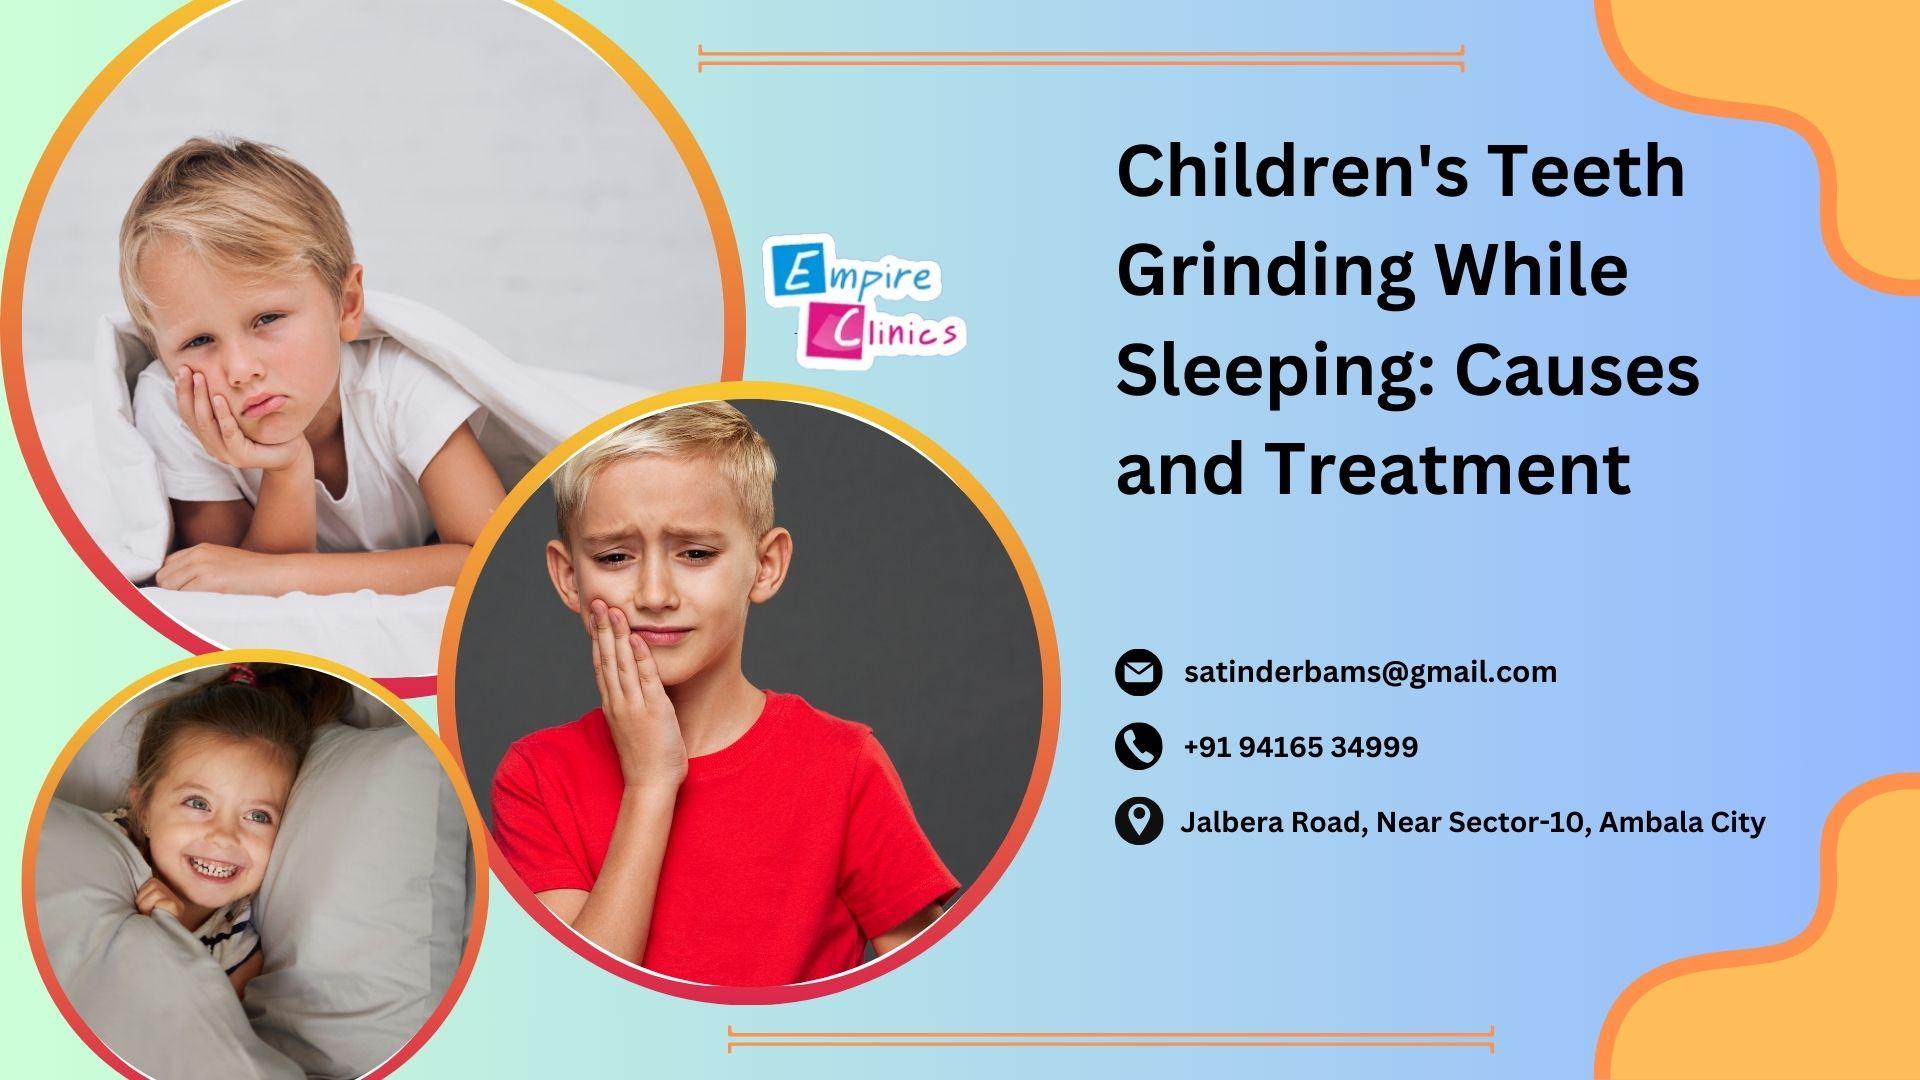 childrens-teeth-grinding-while-sleeping-causes-and-treatment